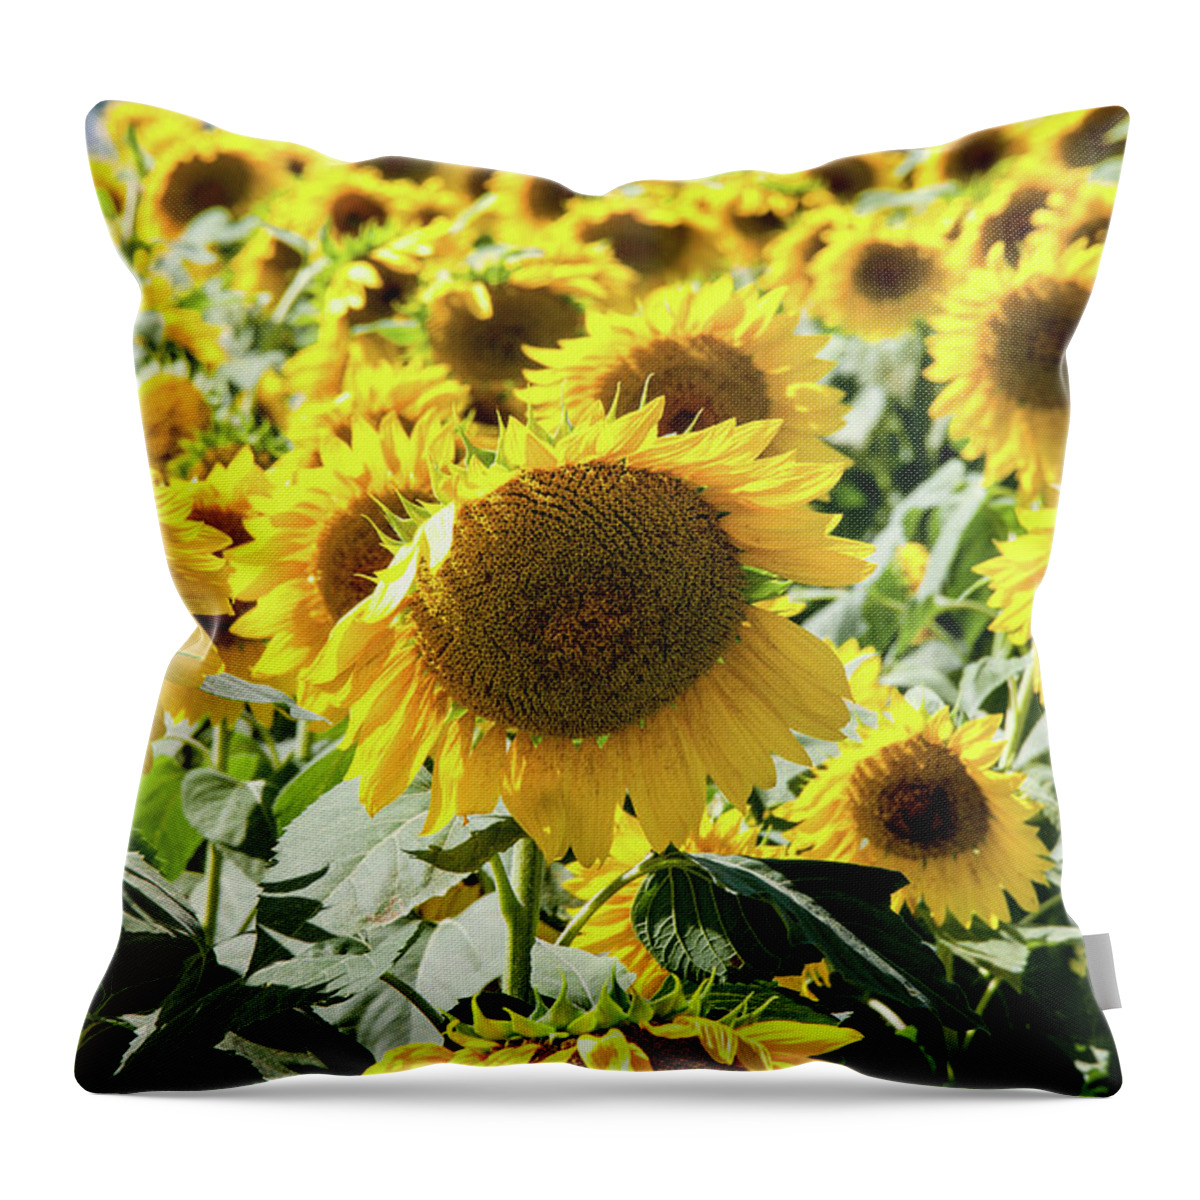 Farm Throw Pillow featuring the photograph Trying to Feel Unique by Greg Fortier